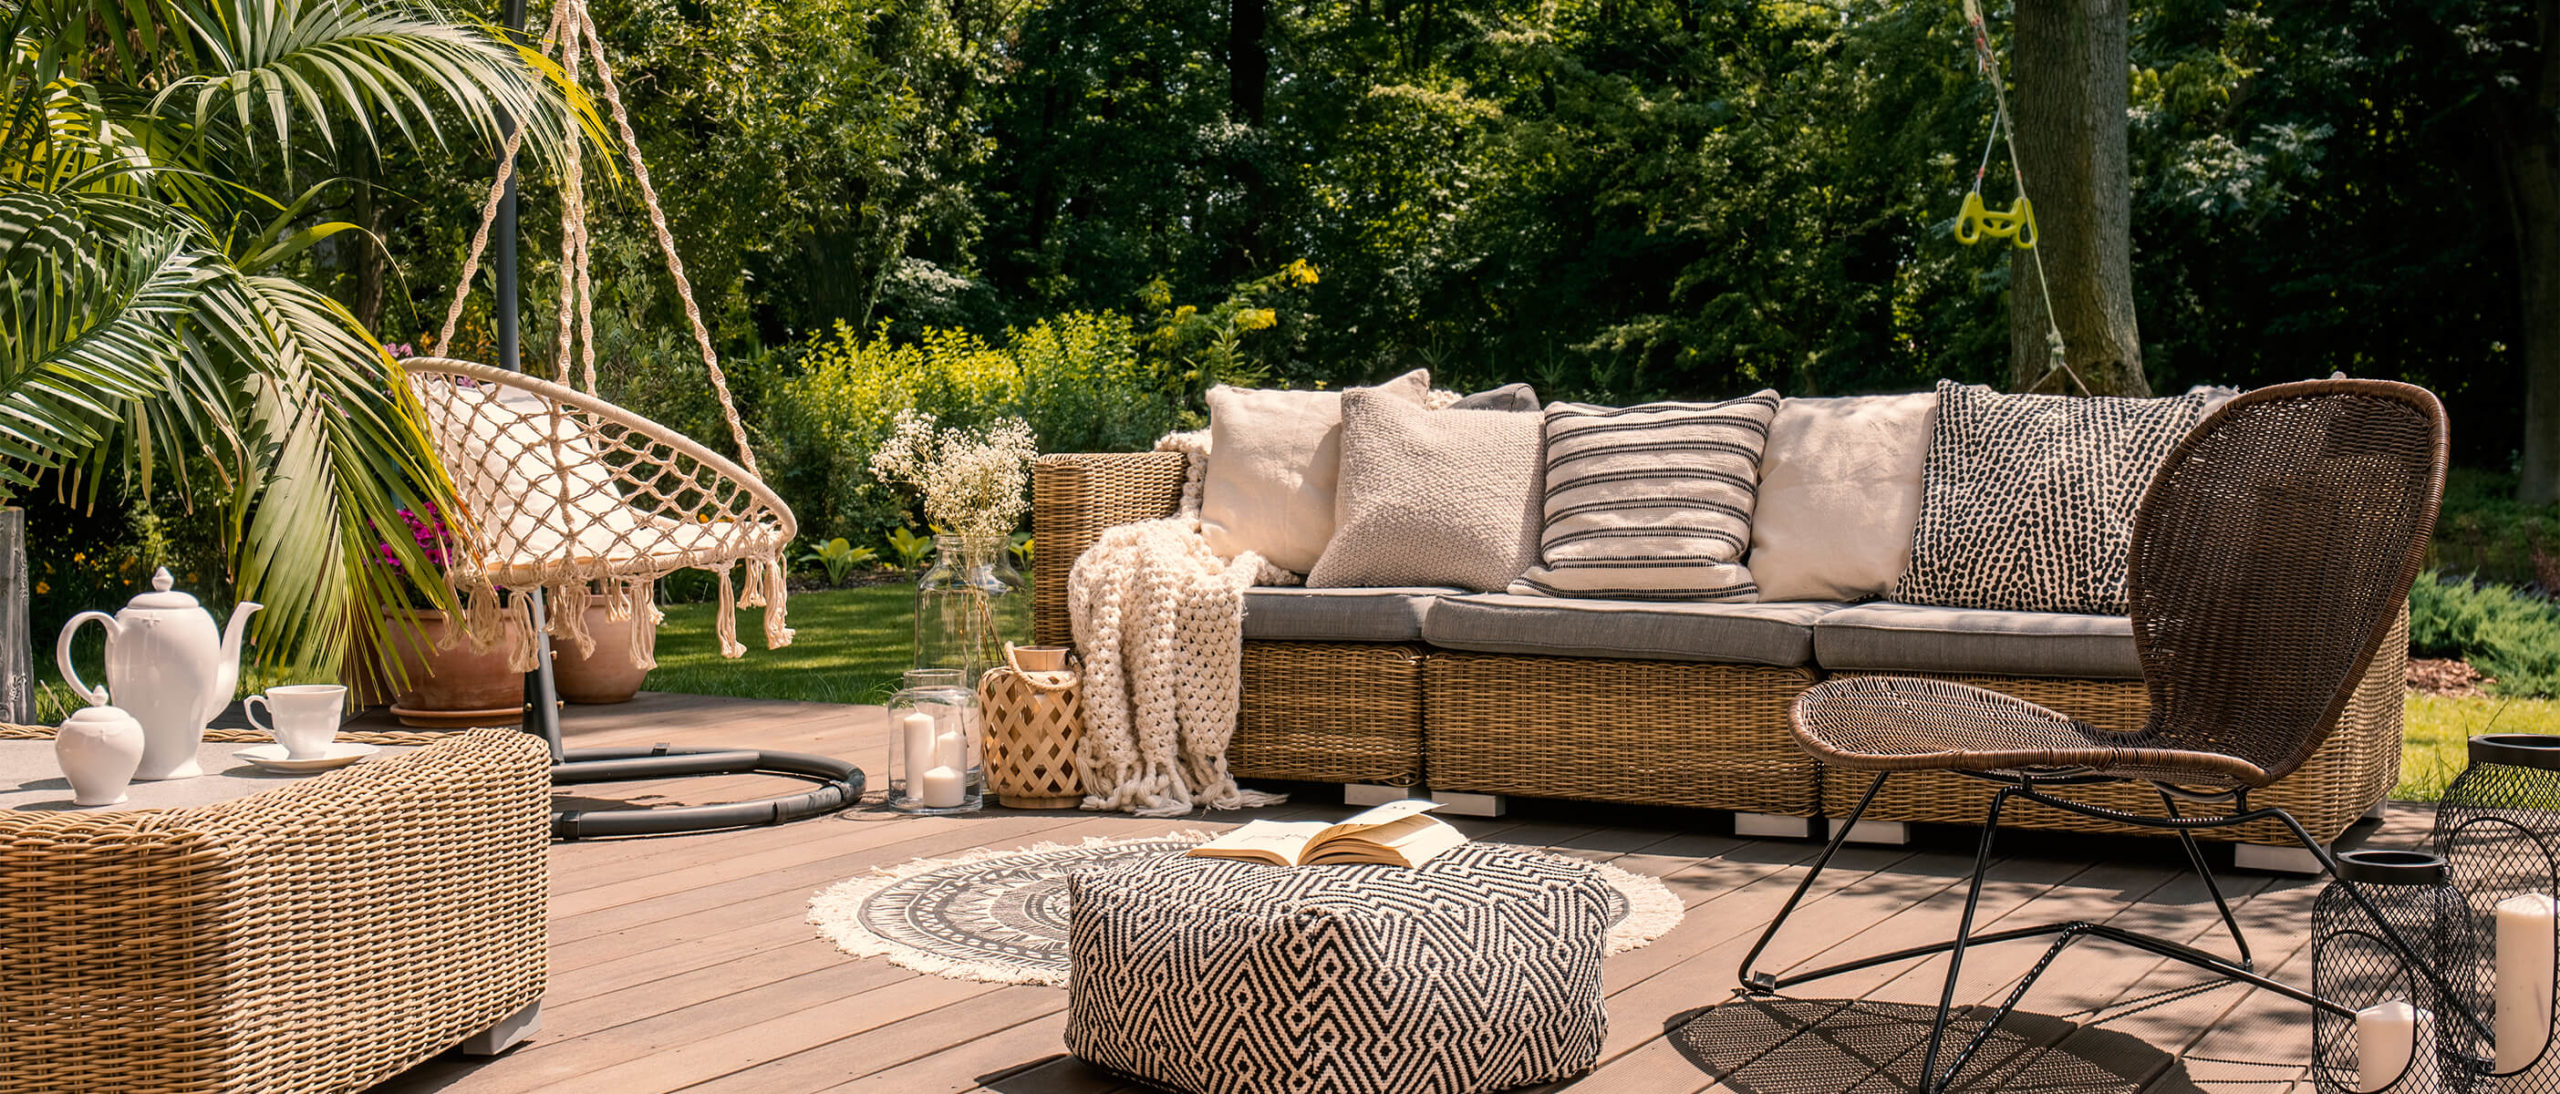 Ways To Beautify Your Patio or Deck for Summer on a Budget